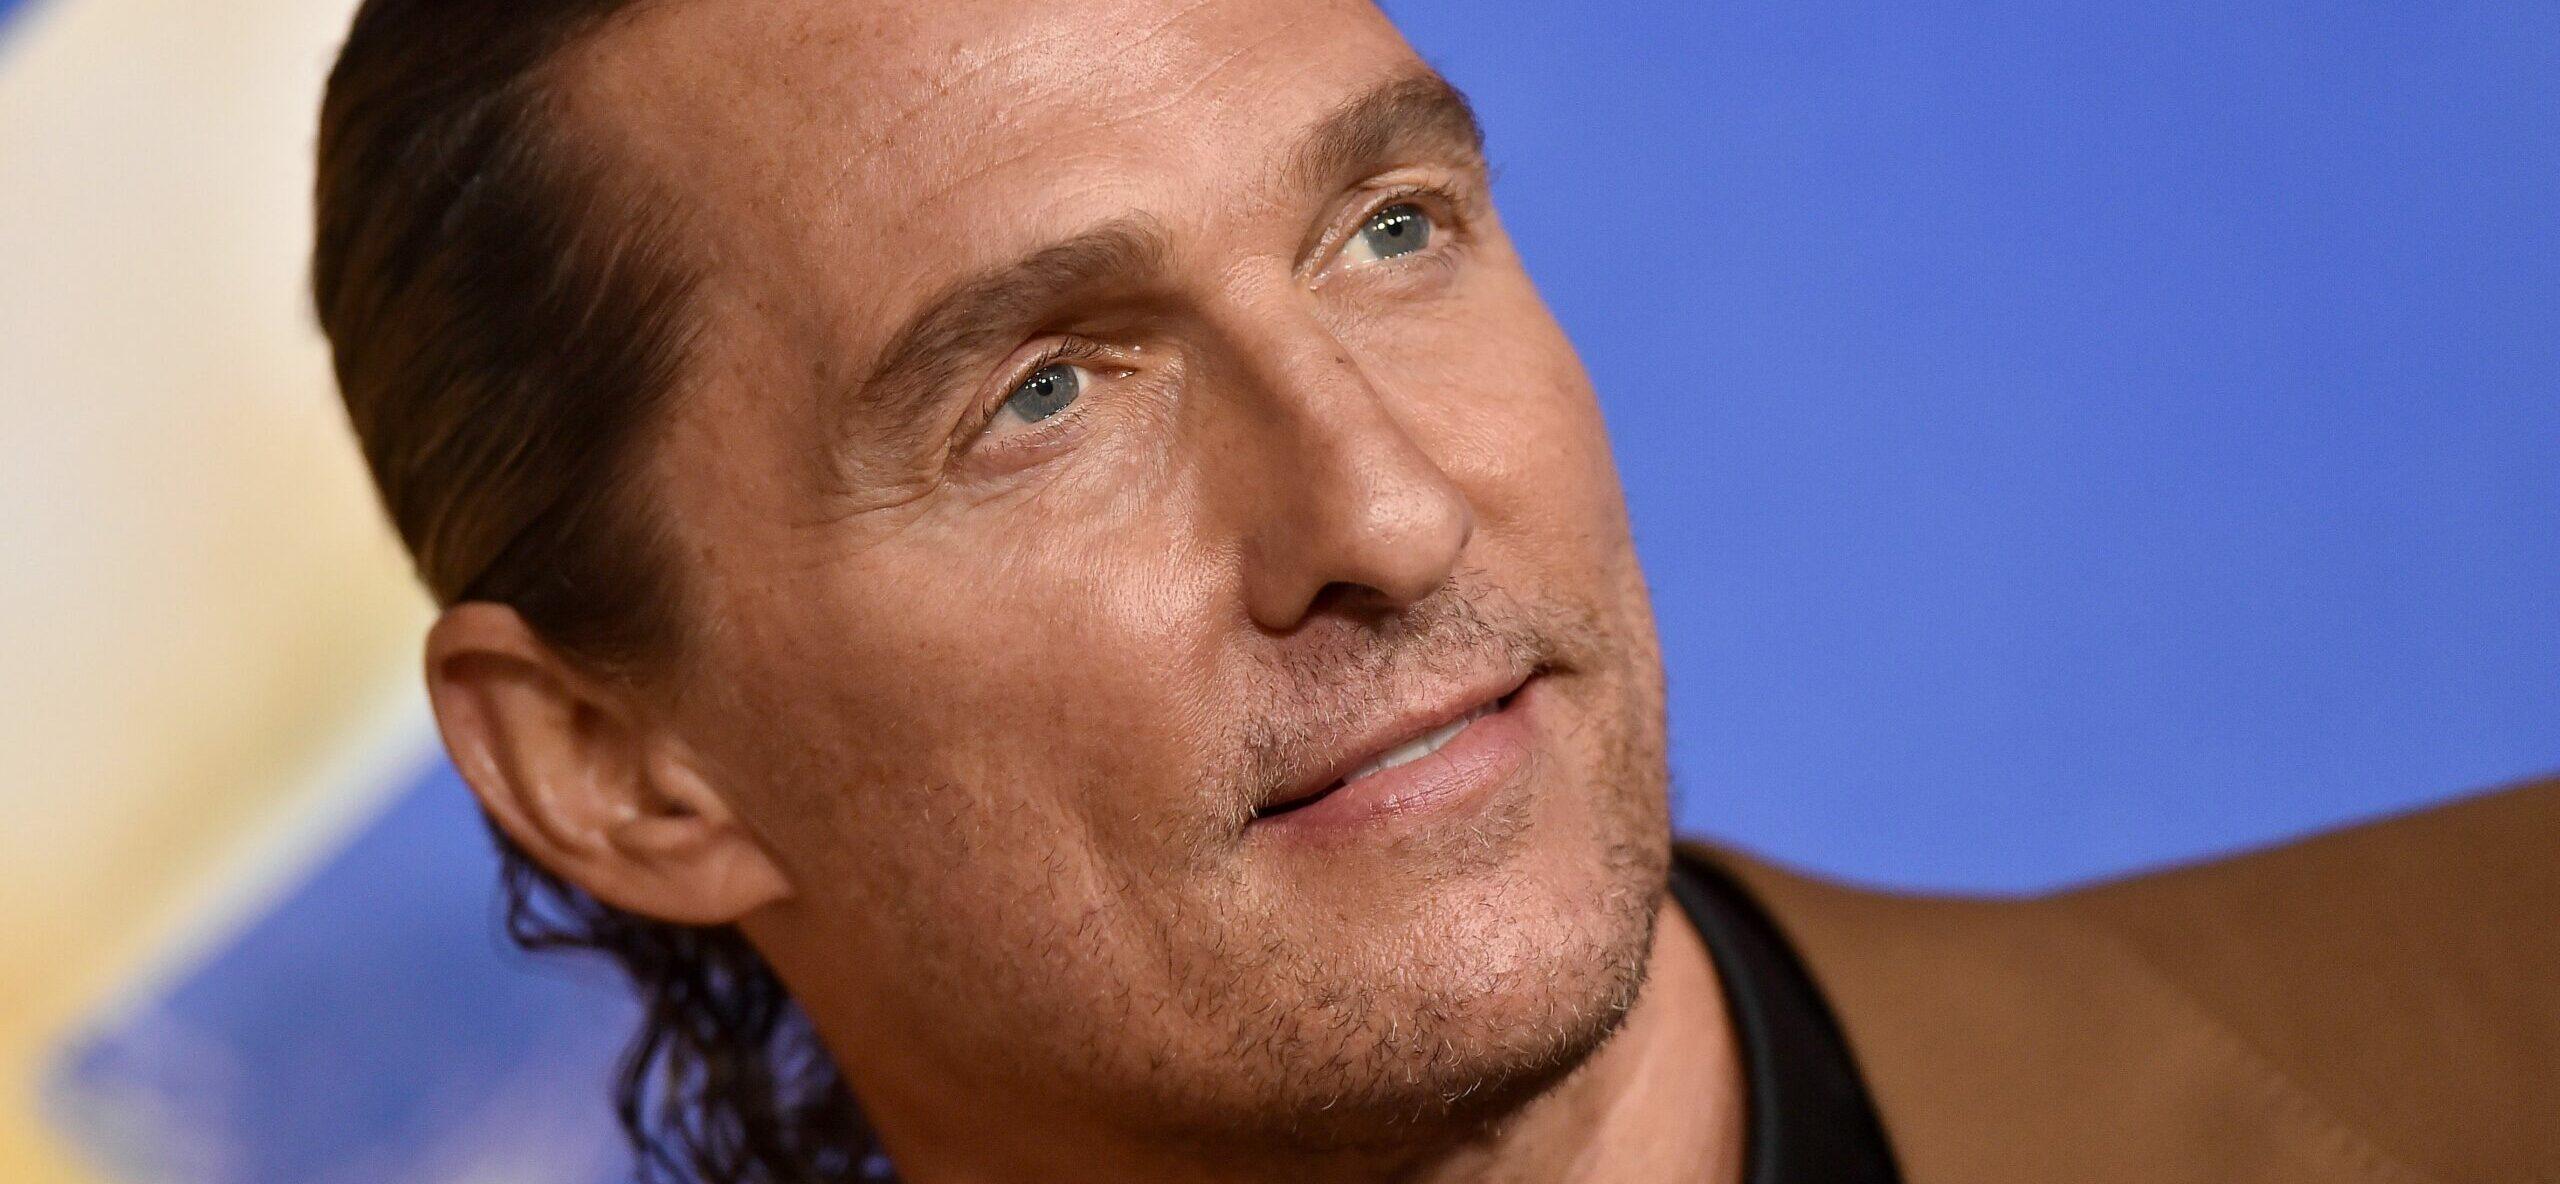 Matthew McConaughey at the "Sing 2 Premiere